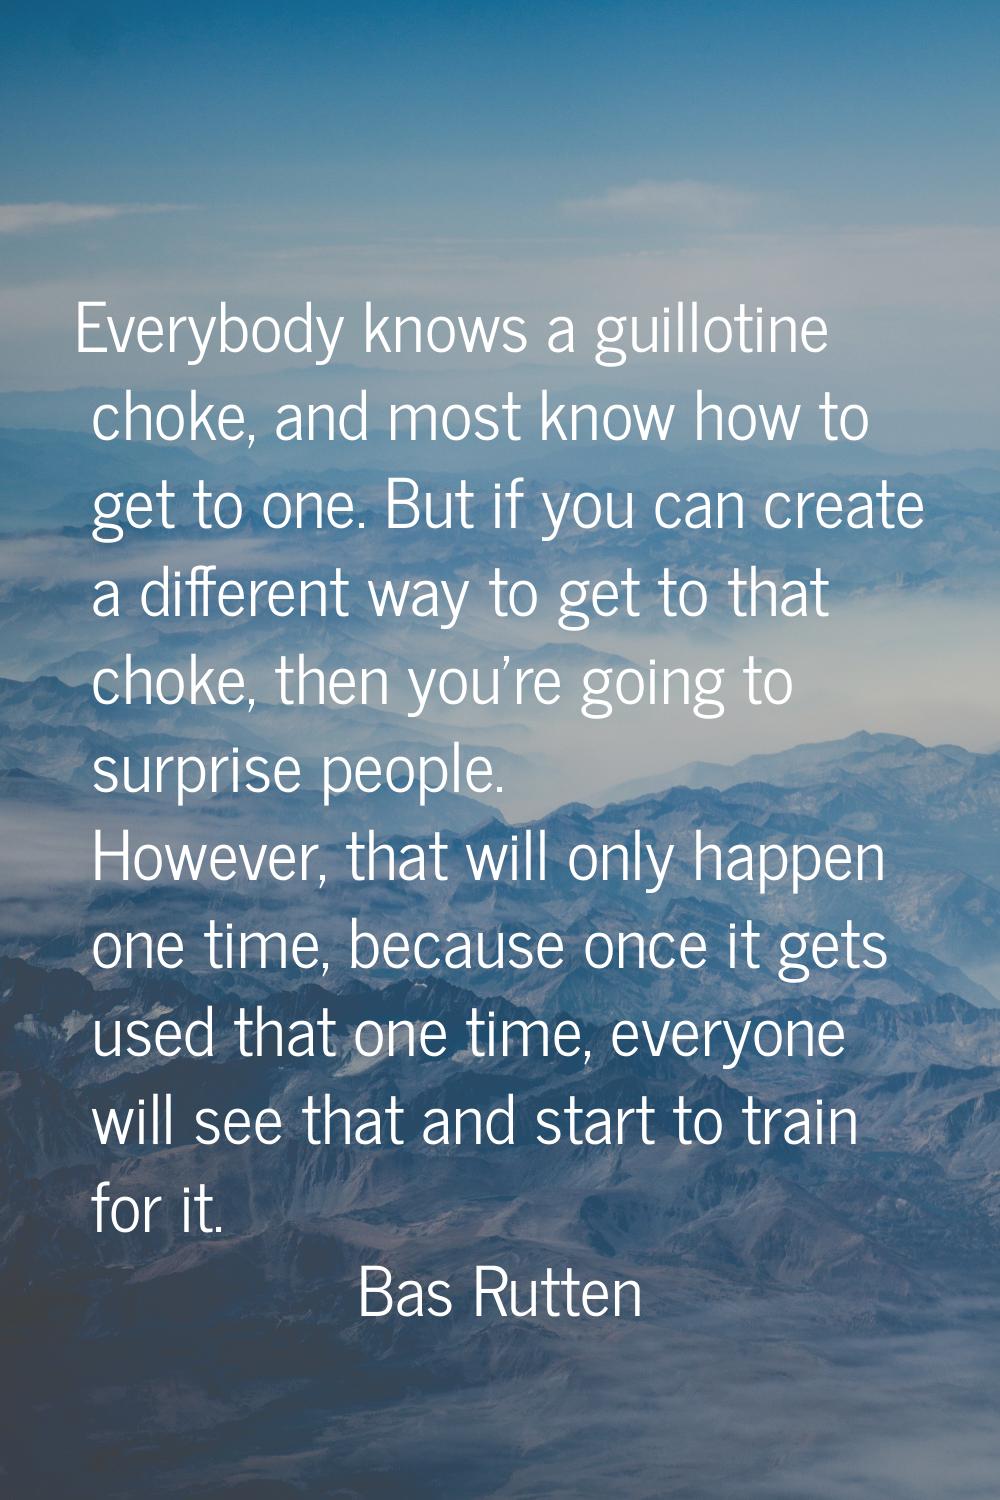 Everybody knows a guillotine choke, and most know how to get to one. But if you can create a differ